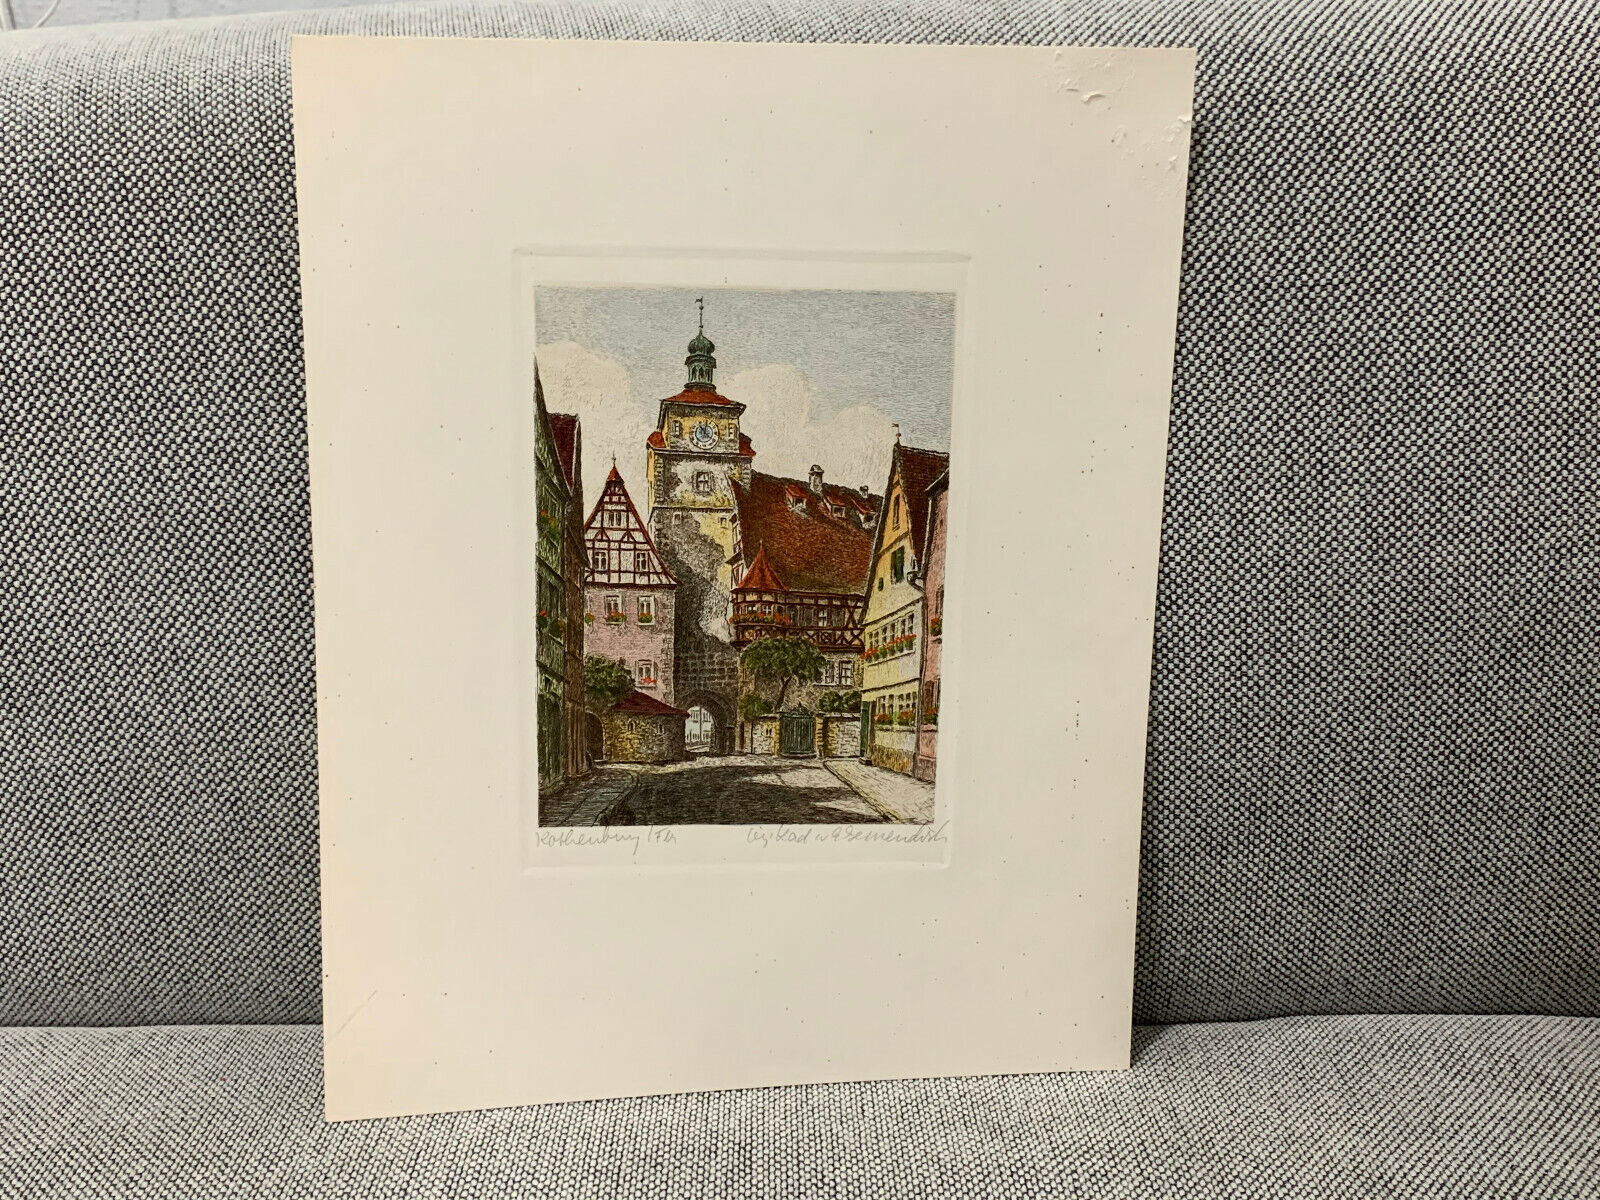 Vintage German Rothenburg Aquatint Etching Print Signed by the Artist